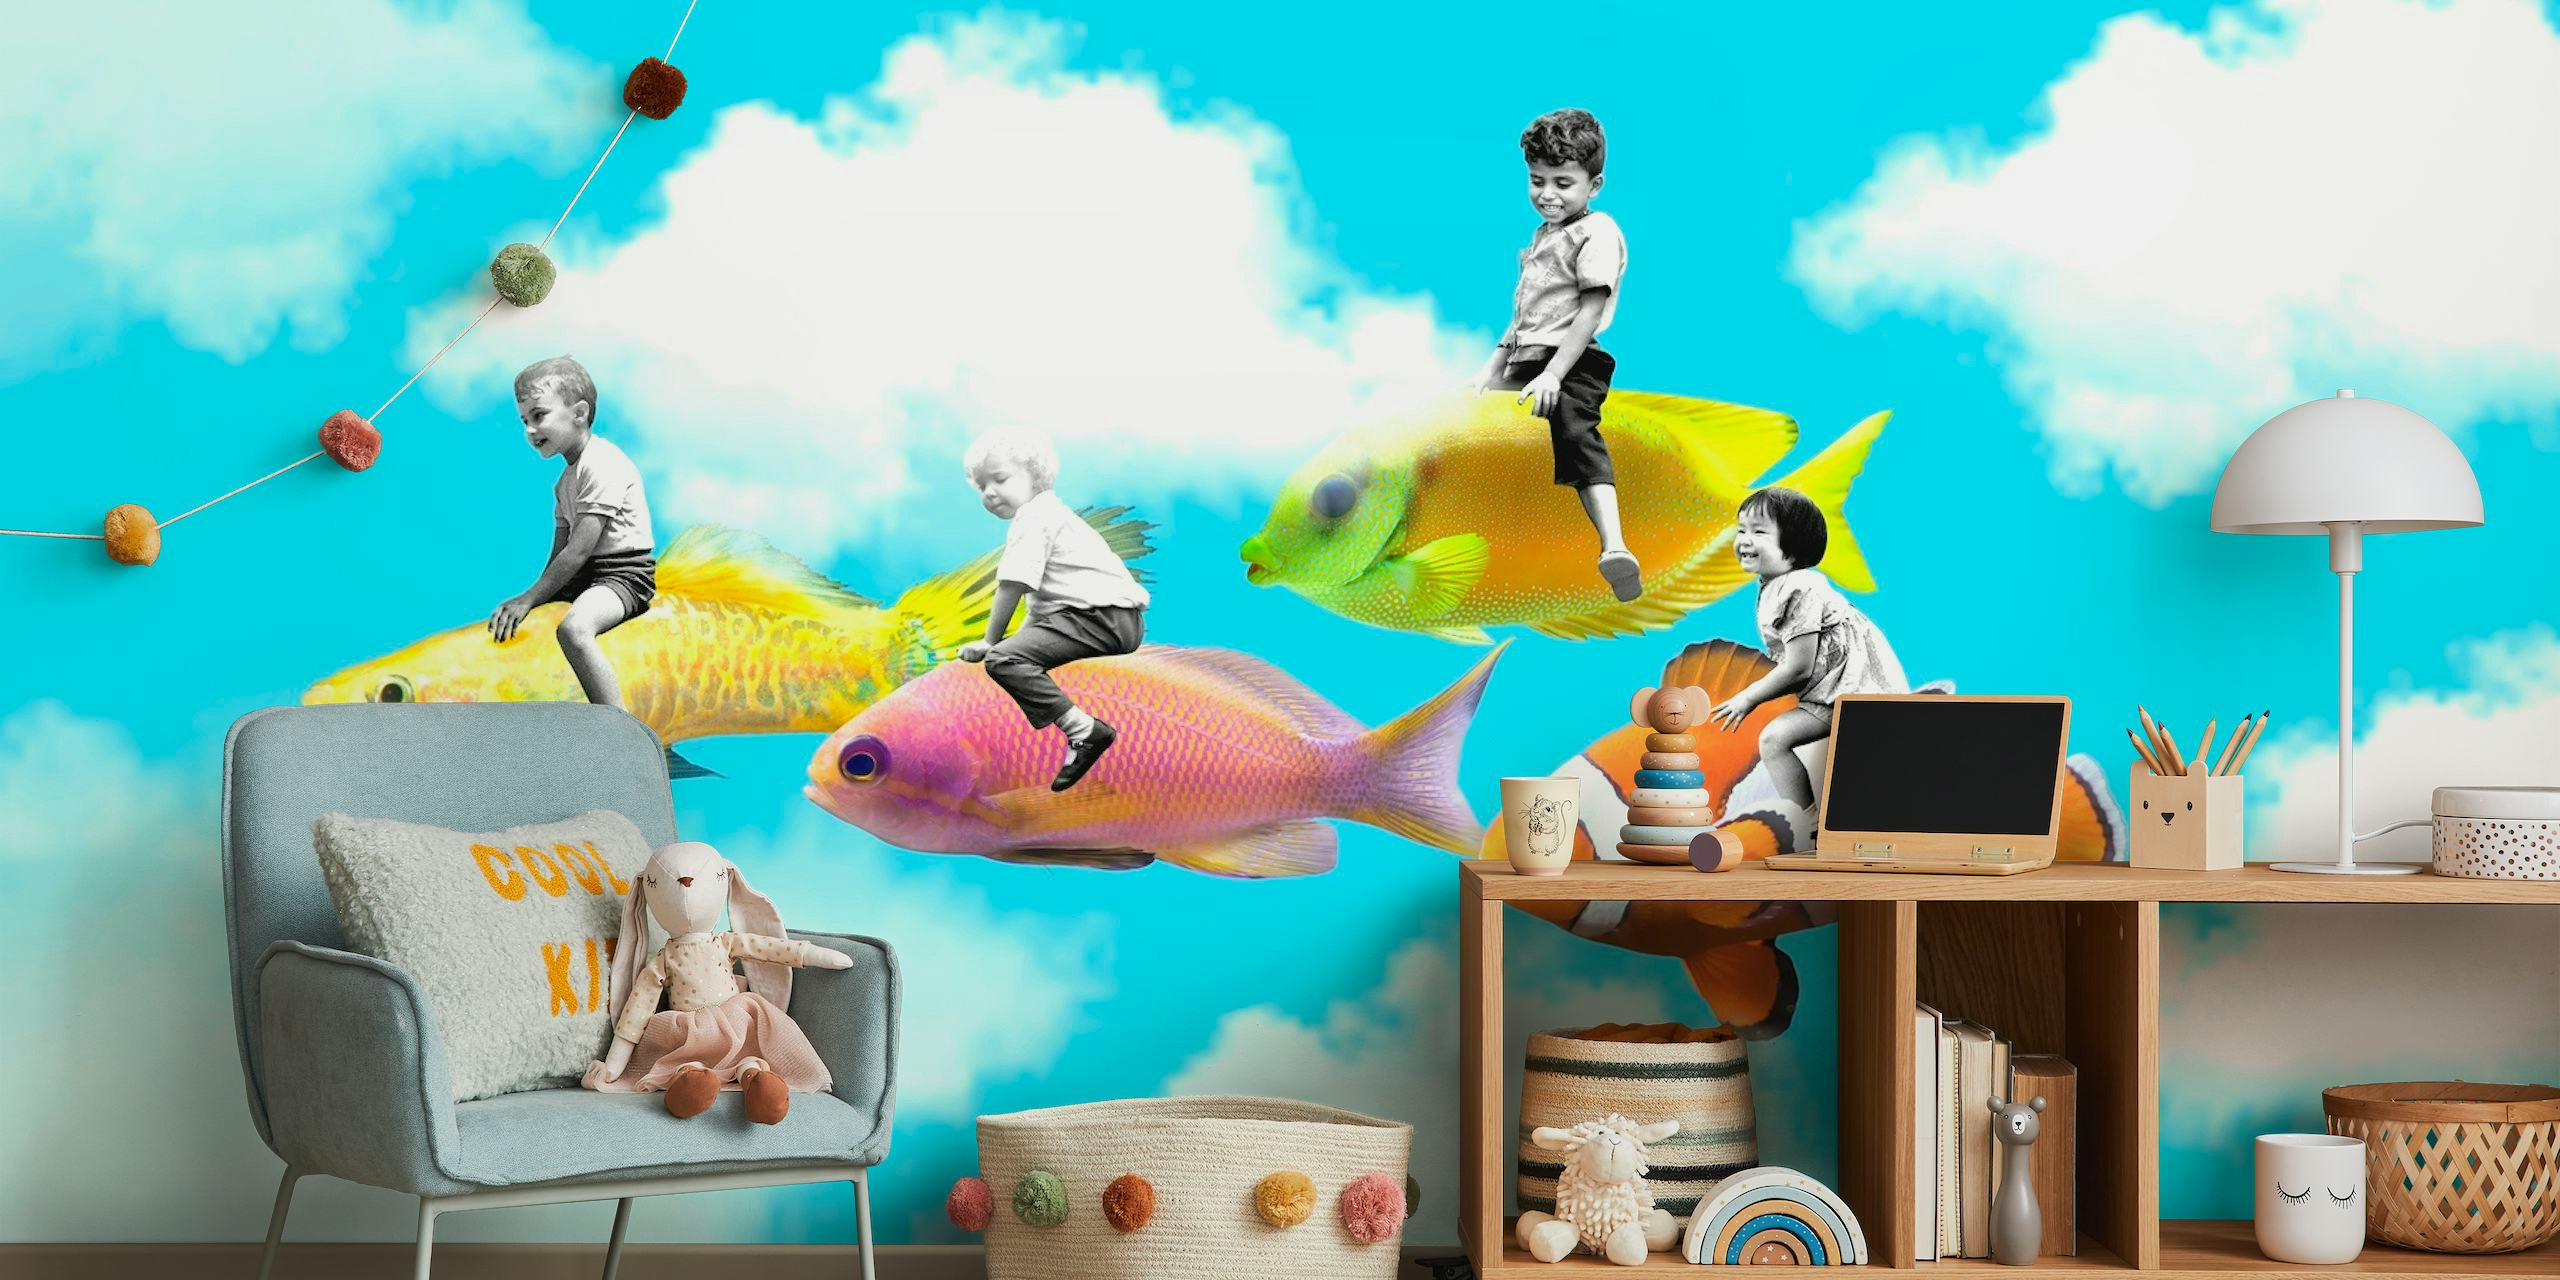 Children riding colorful fish in the 'Children of the World' wall mural against a blue sky background